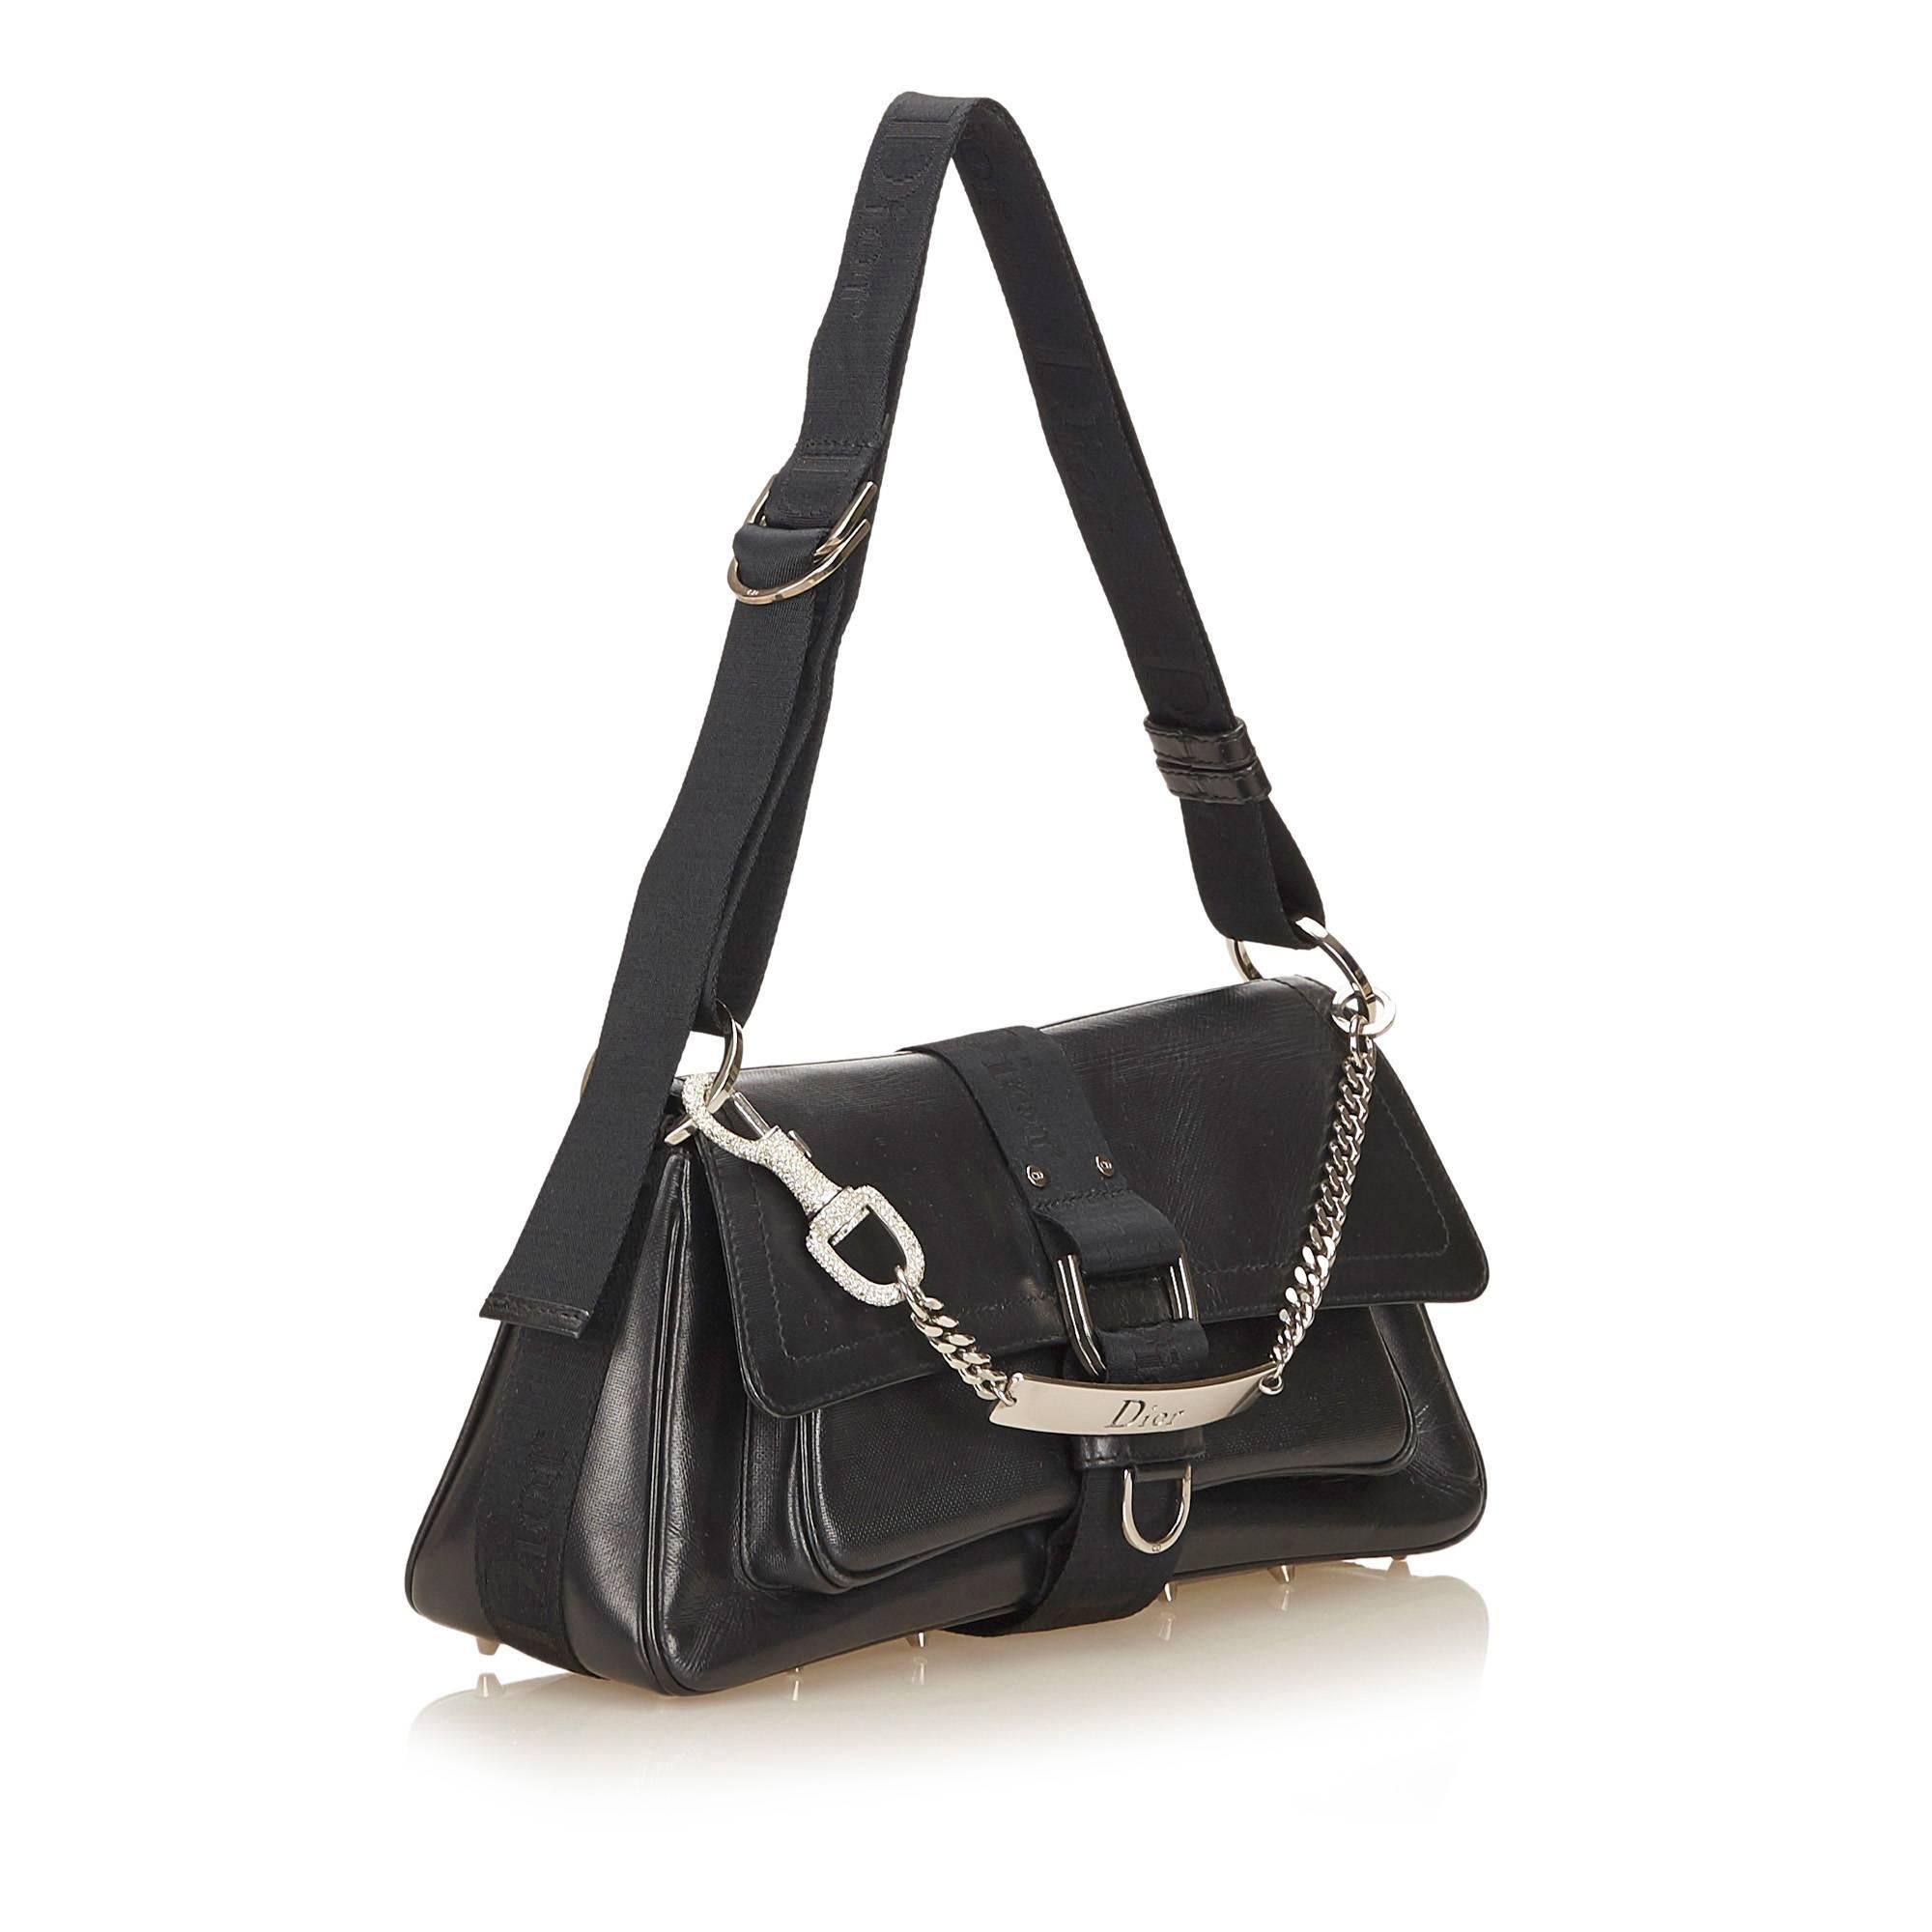 This Admit It Flap bag features a leather body, front and back exterior open pocket, silver-tone chain, front flap with magnetic closure, and interior zip pocket.
